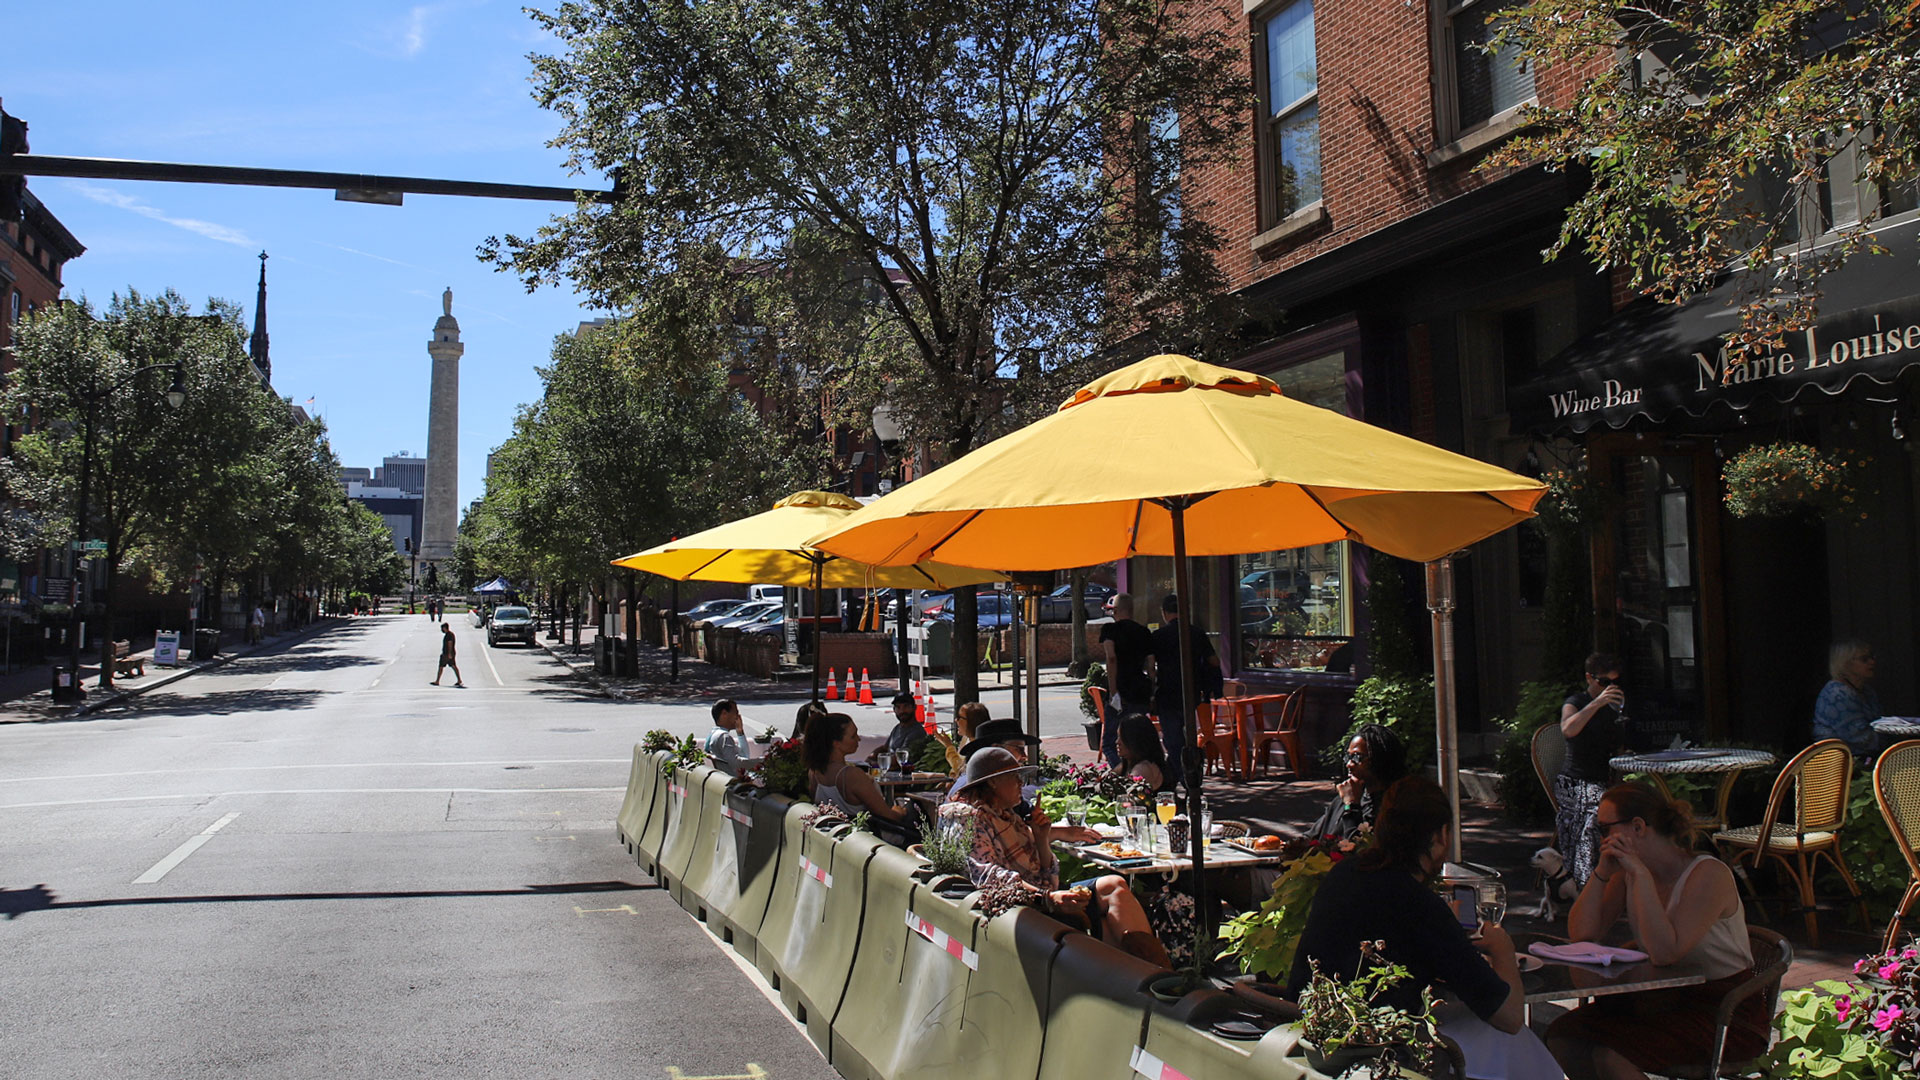 Outdoor dining at Marie Louise Bistro on Historic Charles Street with view of Washington Monument in the background. Baltimore, Maryland.